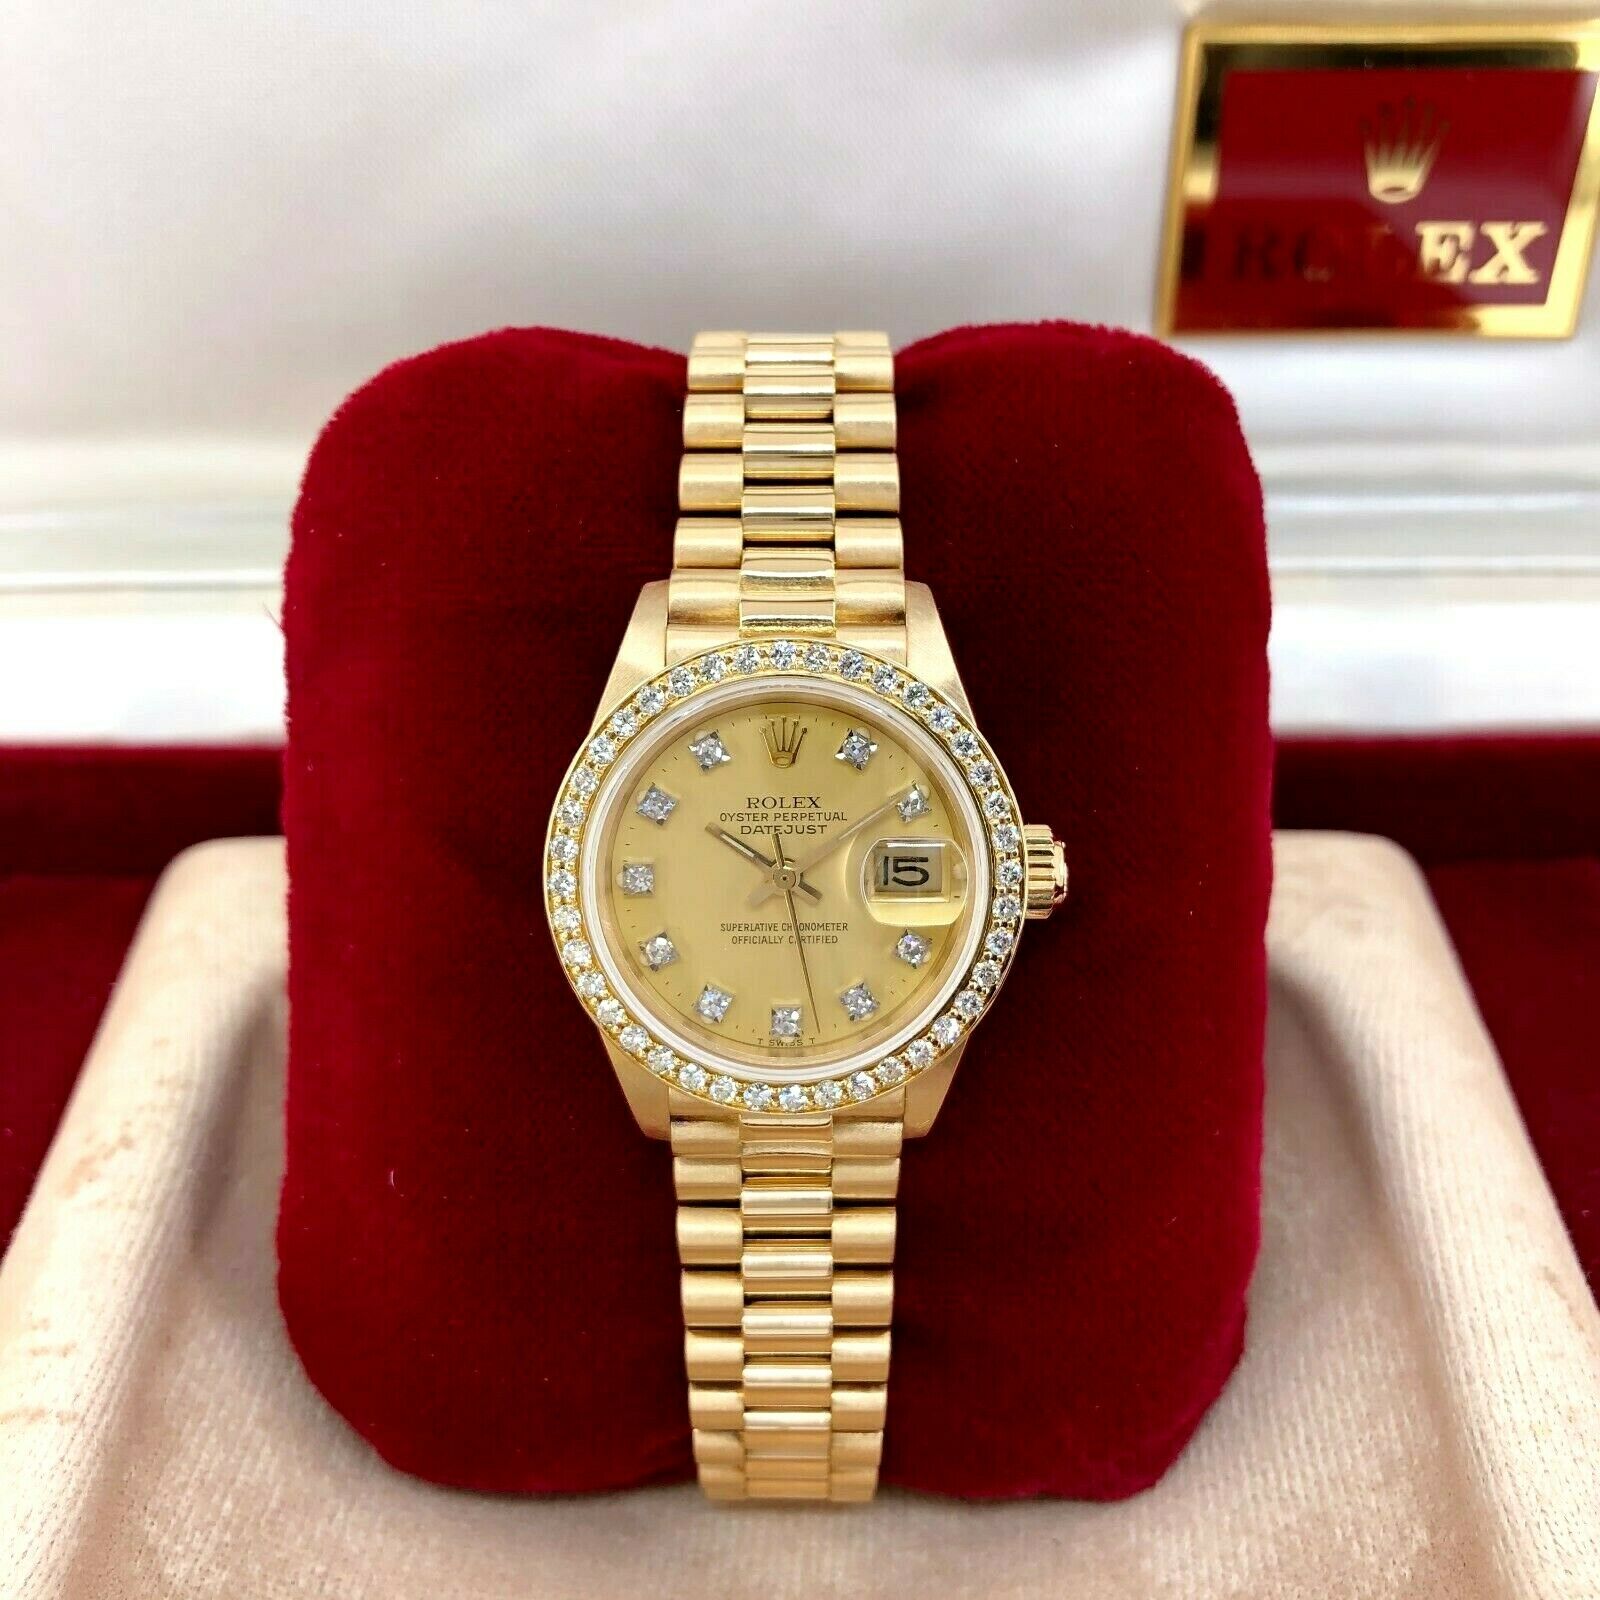 Rolex Datejust President 18K Yellow Gold Dial